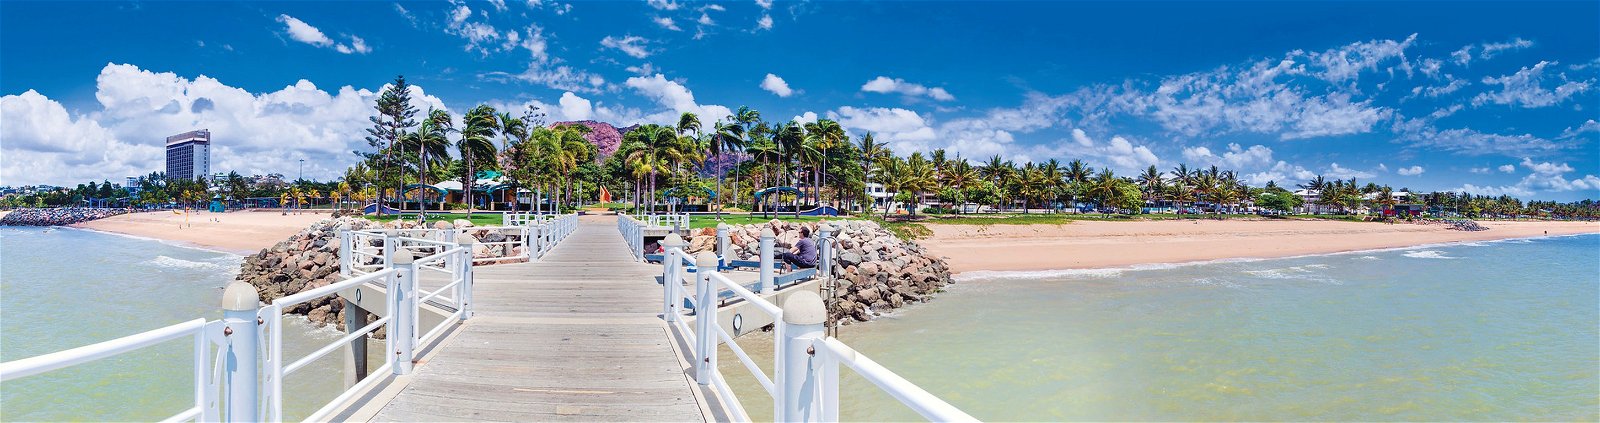 Townsville Dc QLD Accommodation Broome